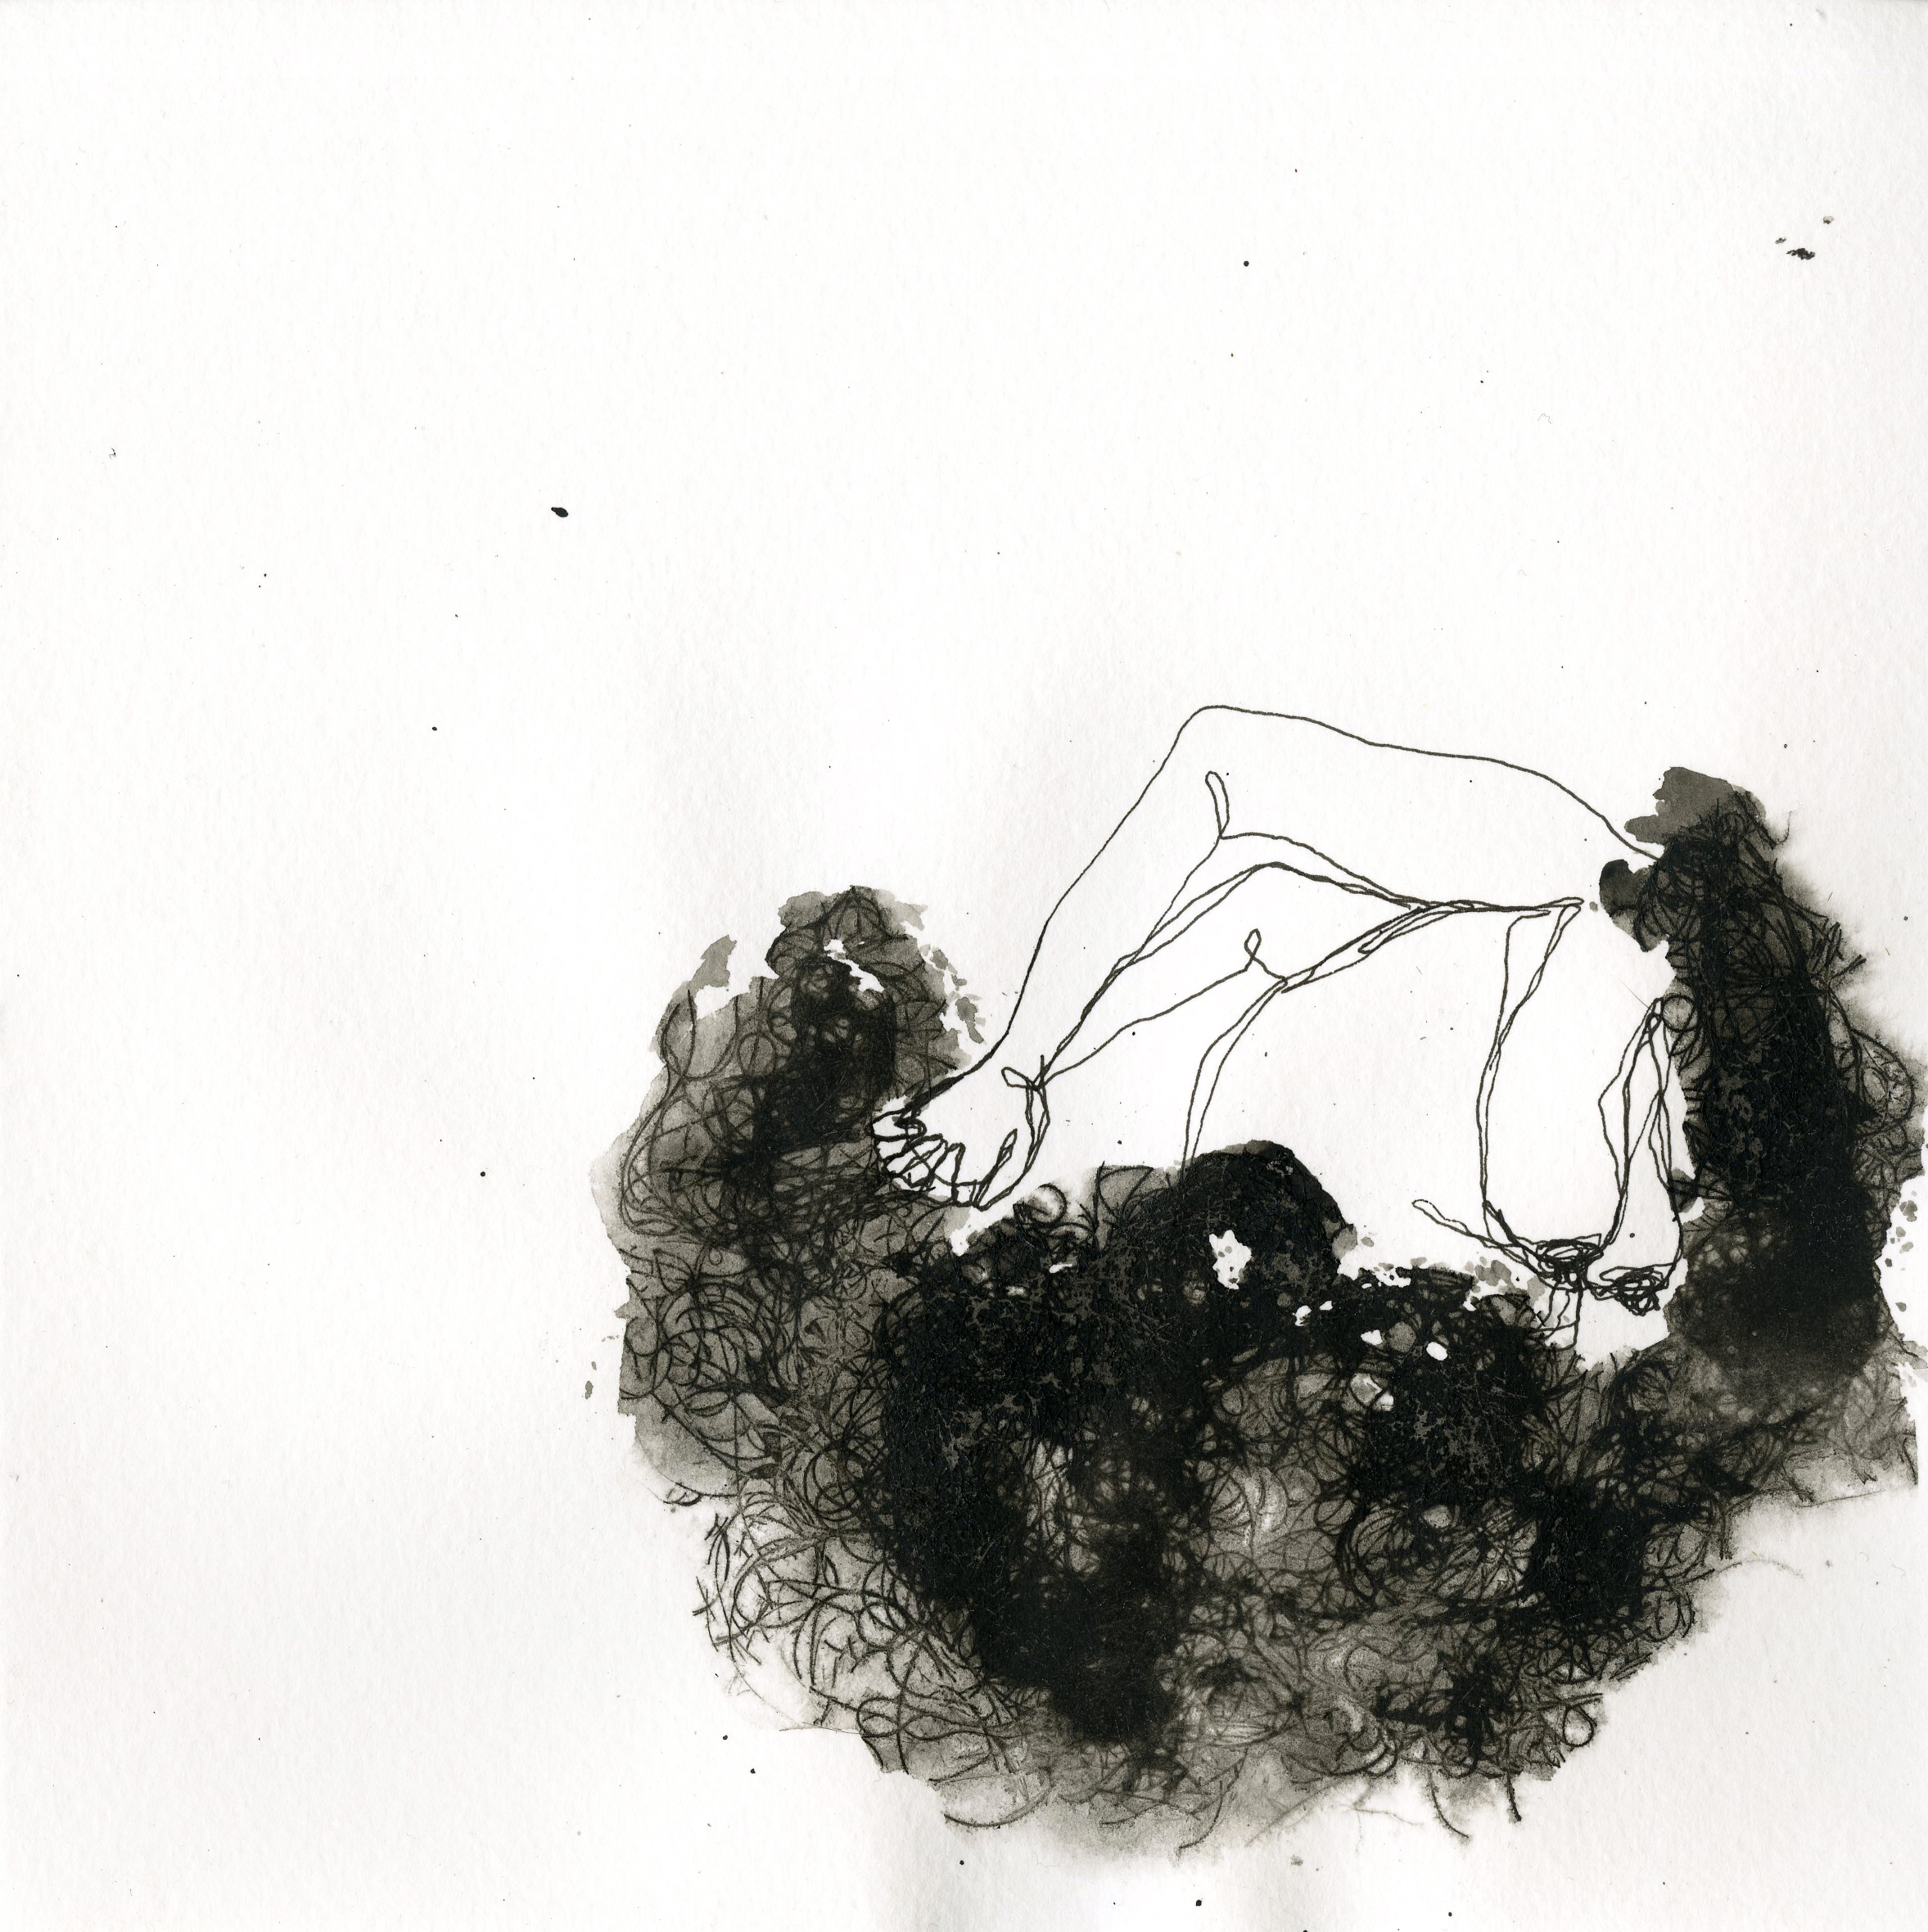 A continuous line drawing of a bent nude torso with breasts, hands clasped behind its back, engulfed by dense clouds of hair and ink.